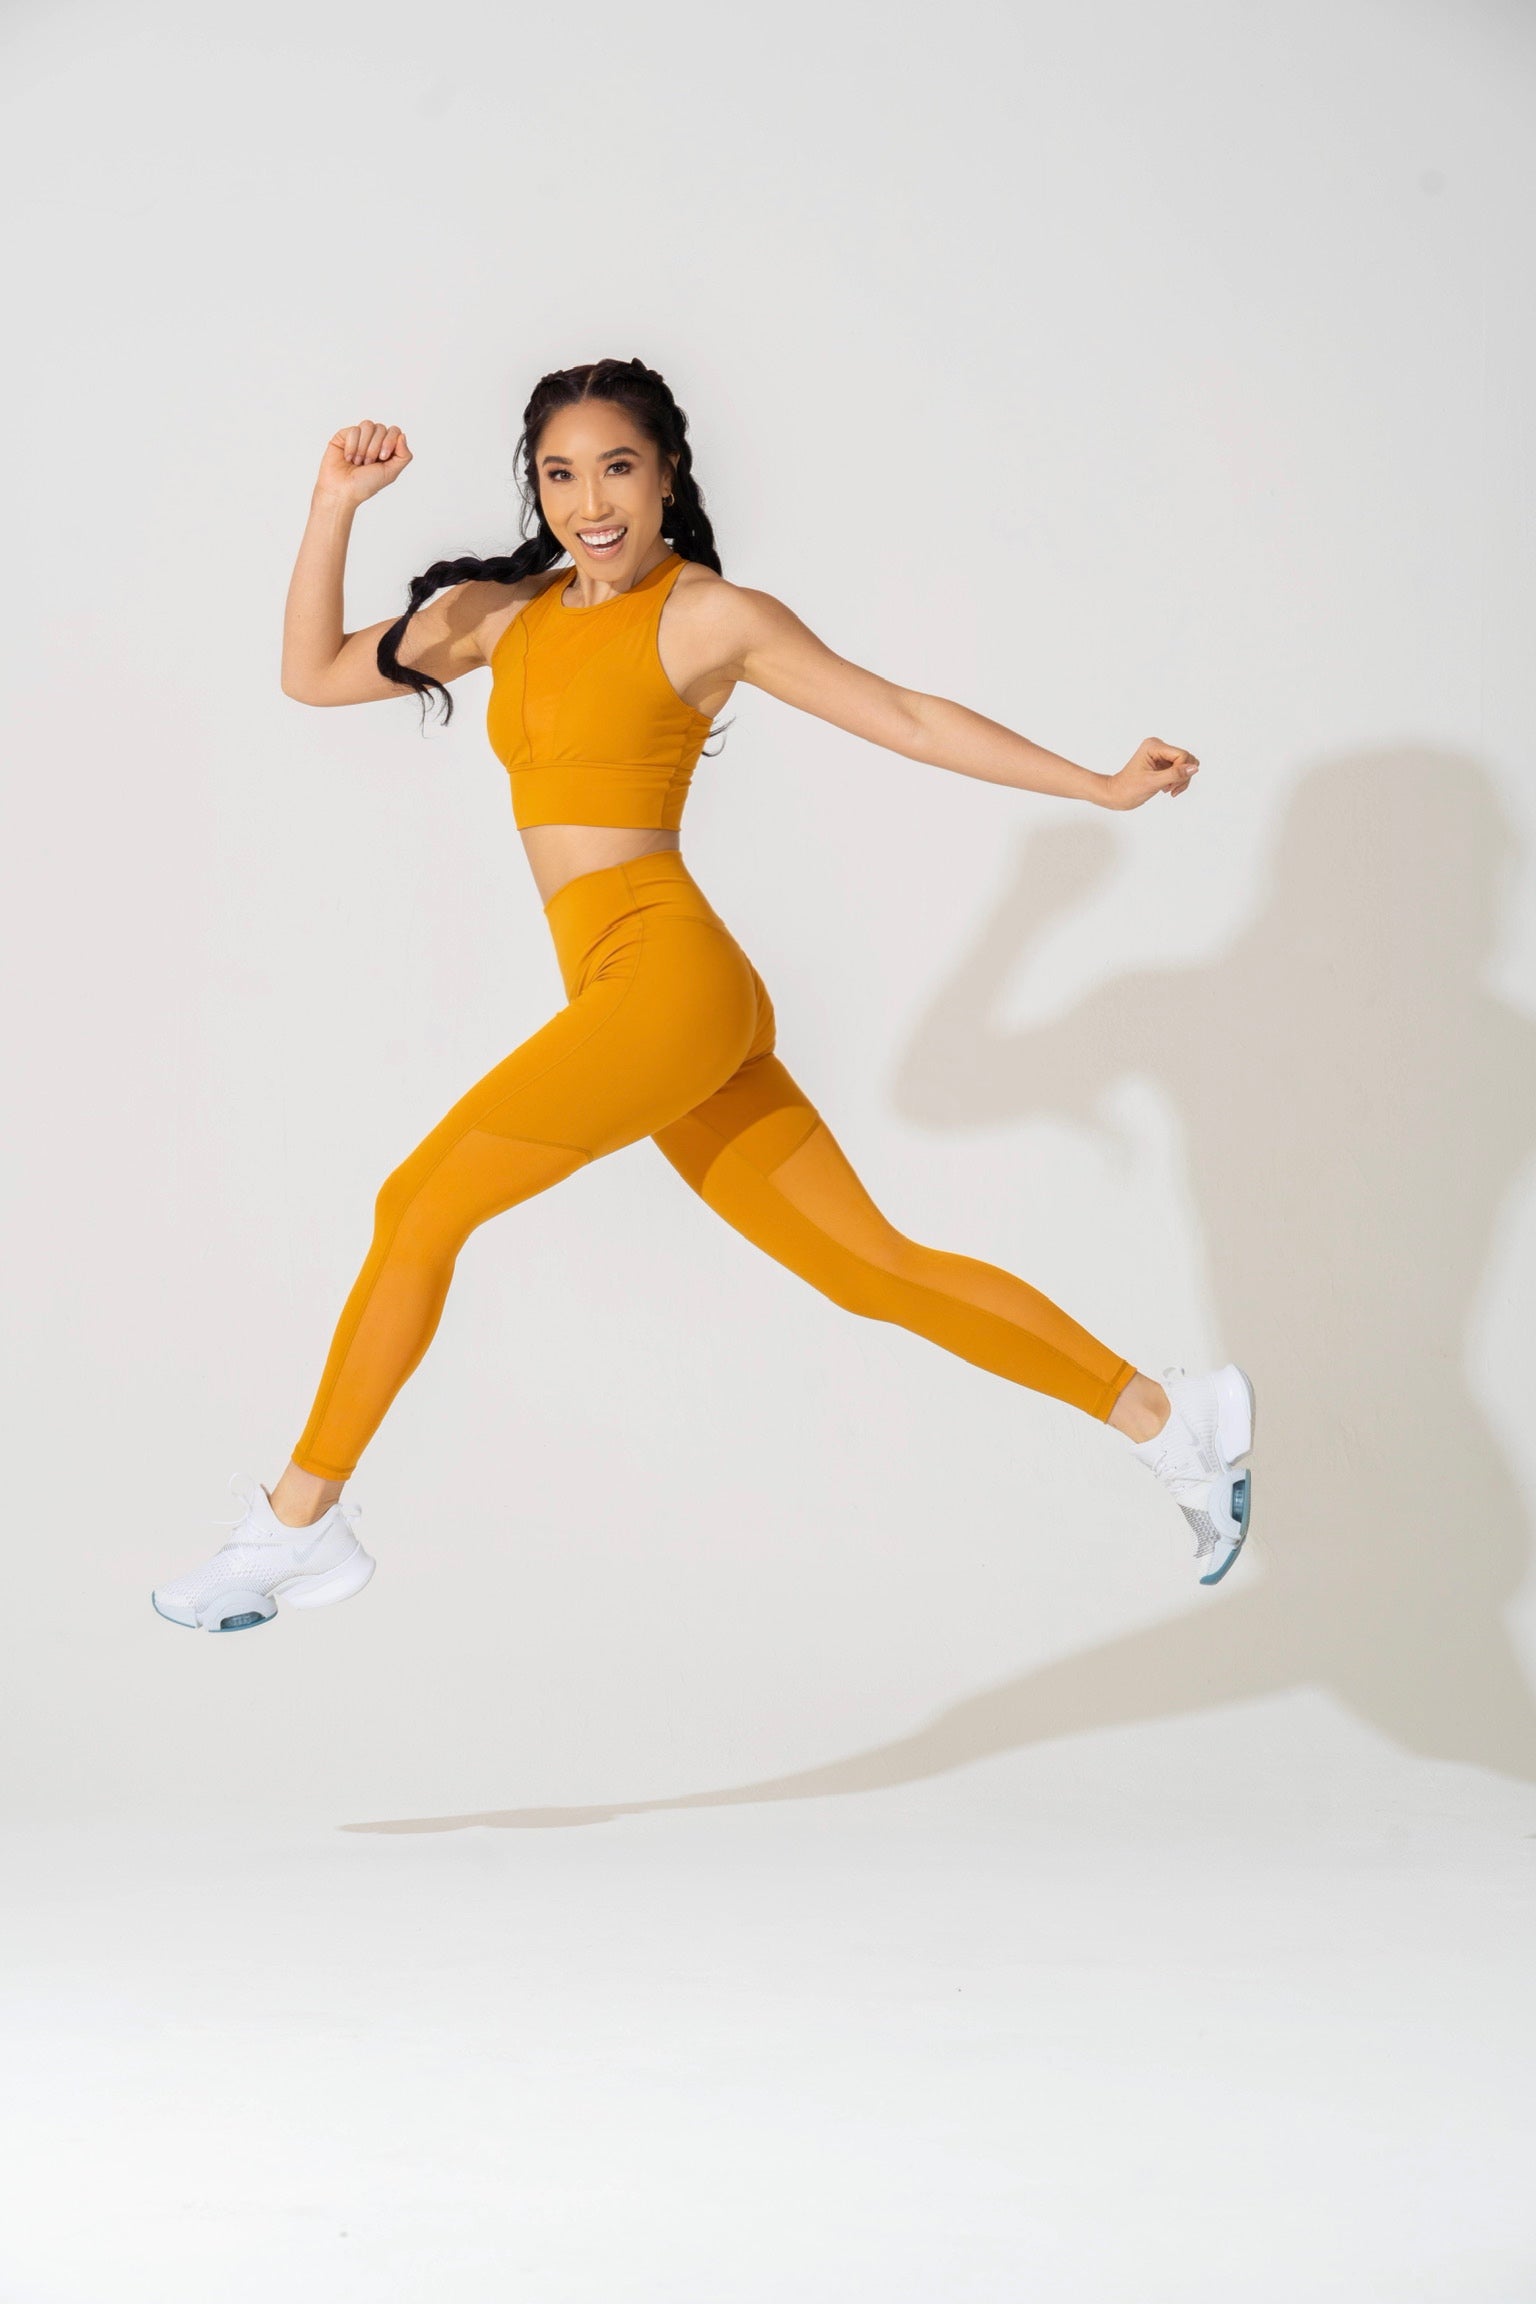 The Best-Selling Products You Need from Women-Owned Businesses - Blogilates